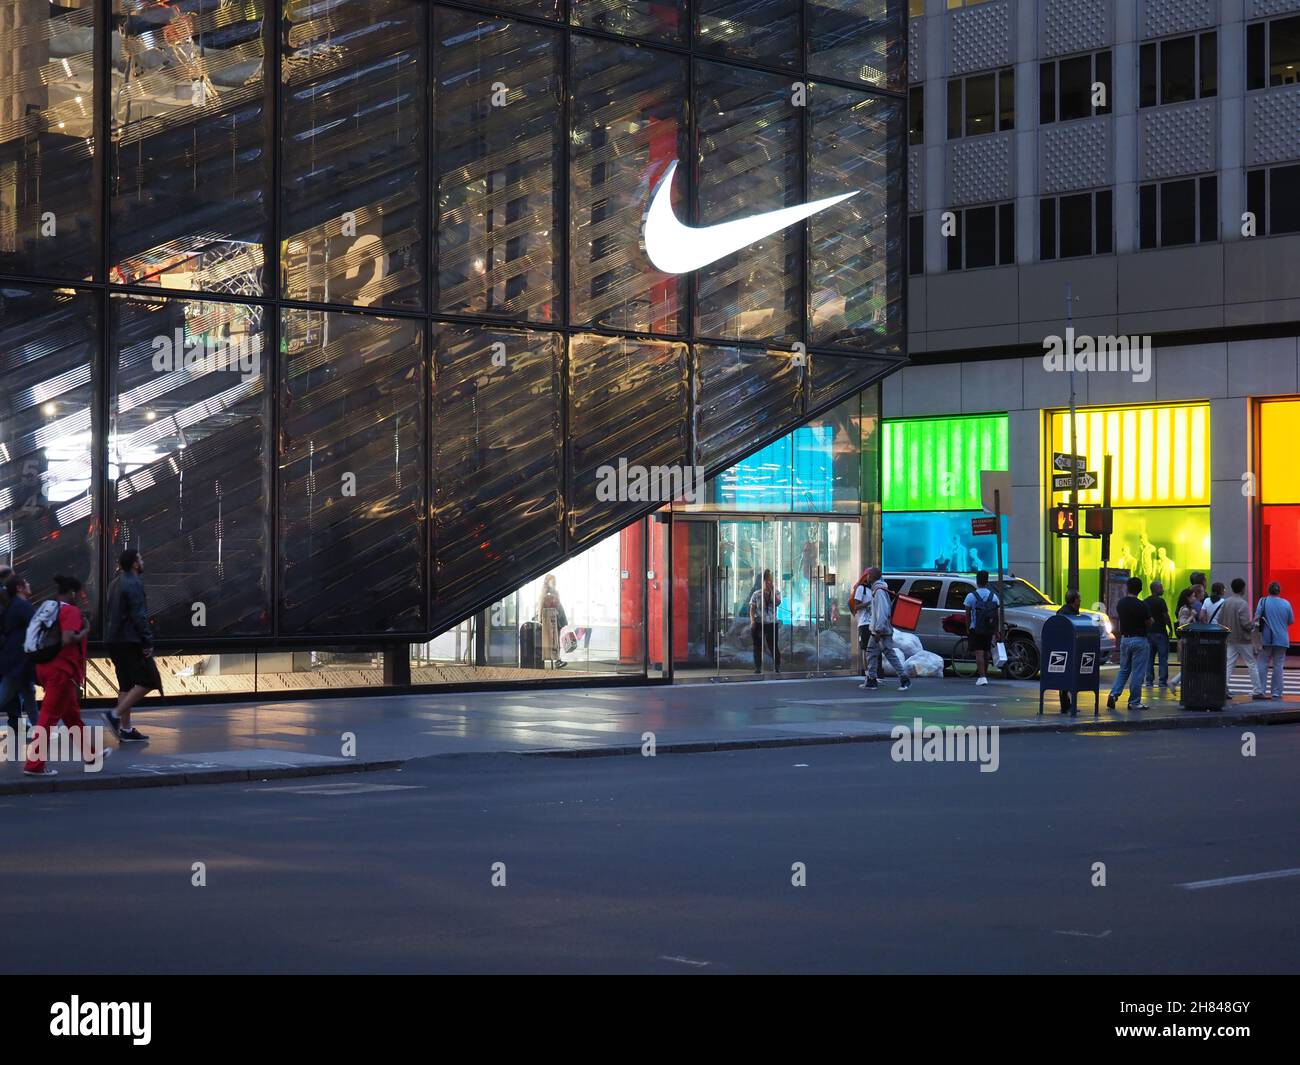 Image of the Nike store located on 5th Avenue Stock Photo - Alamy